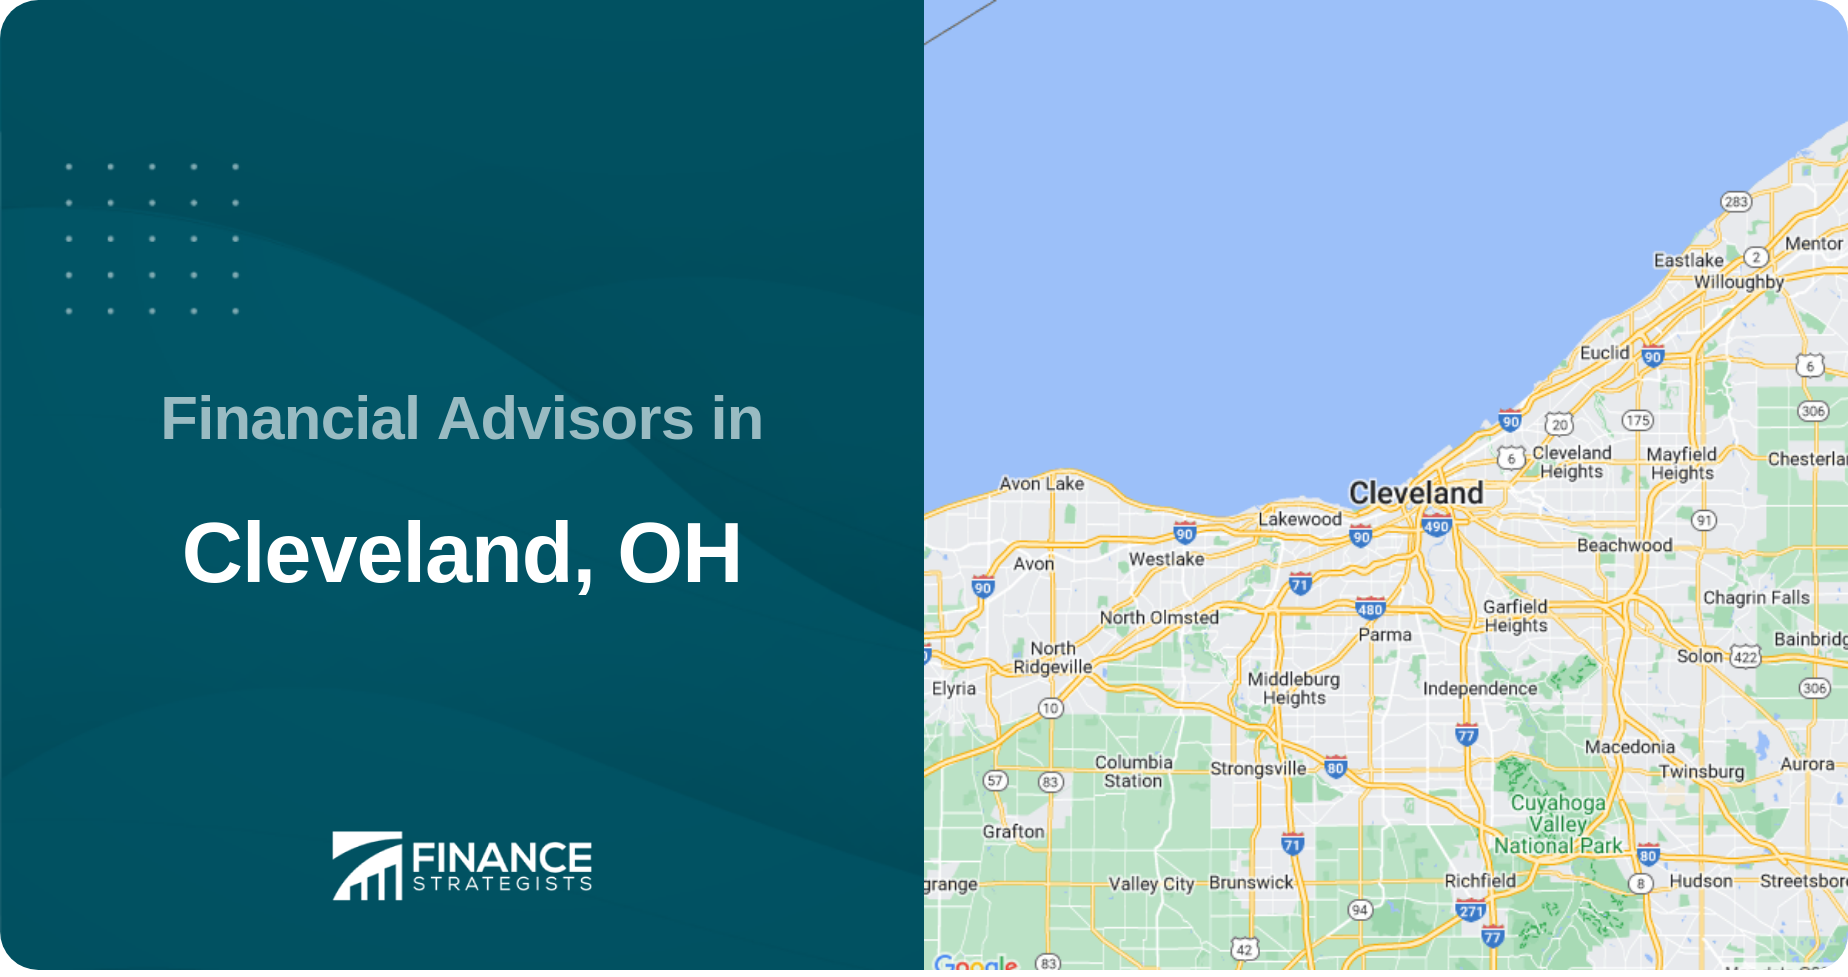 Financial Advisors in Cleveland, OH